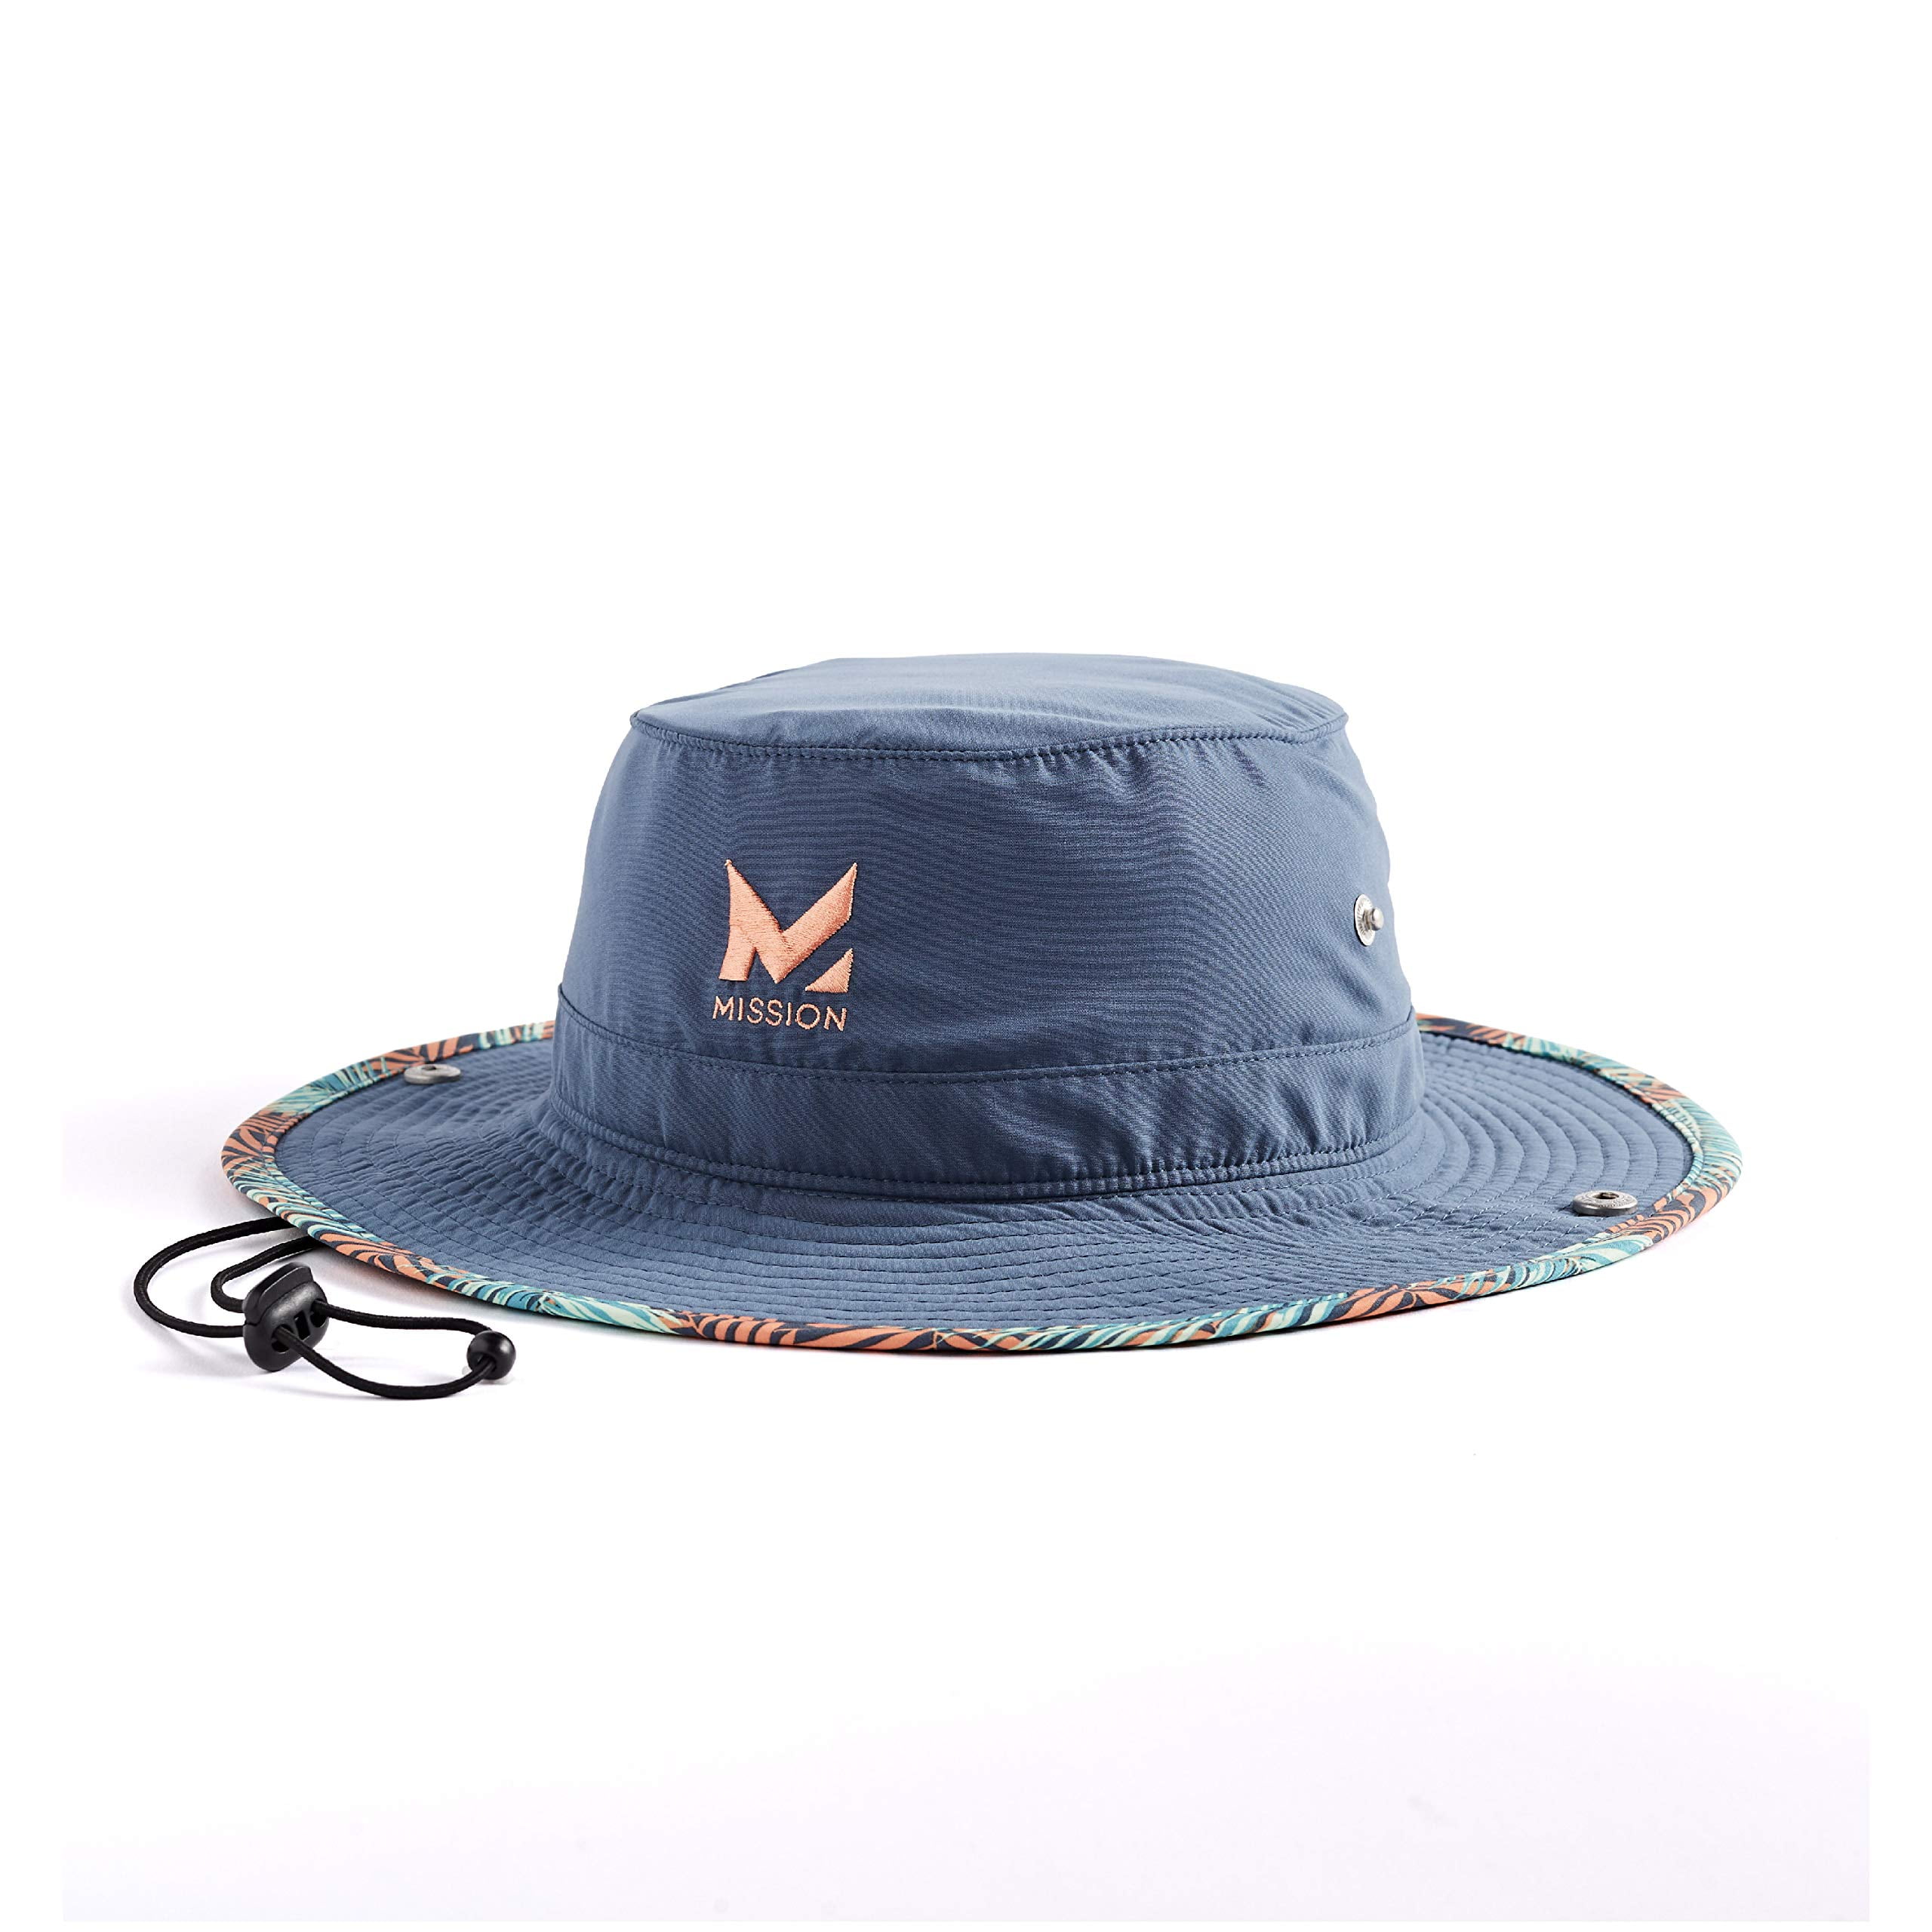 MISSION Cooling Bucket Hat- UPF 50, 3” Wide Brim, Cools When Wet (Sea Palm)  